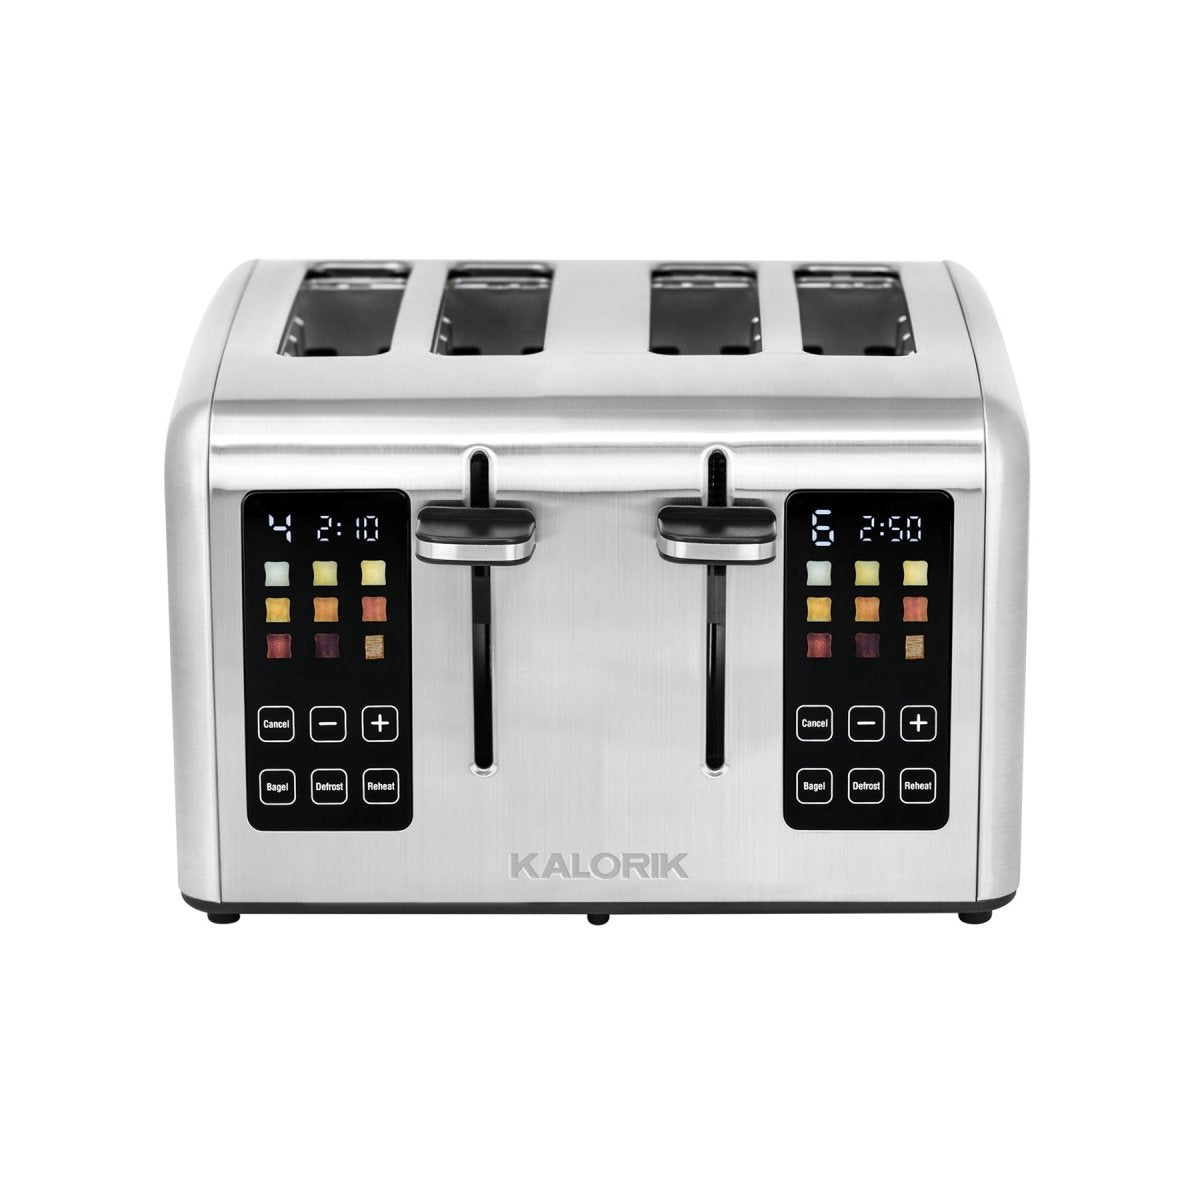 4 Slice Toaster, Countdown Stainless Steel Toaster with Bagel